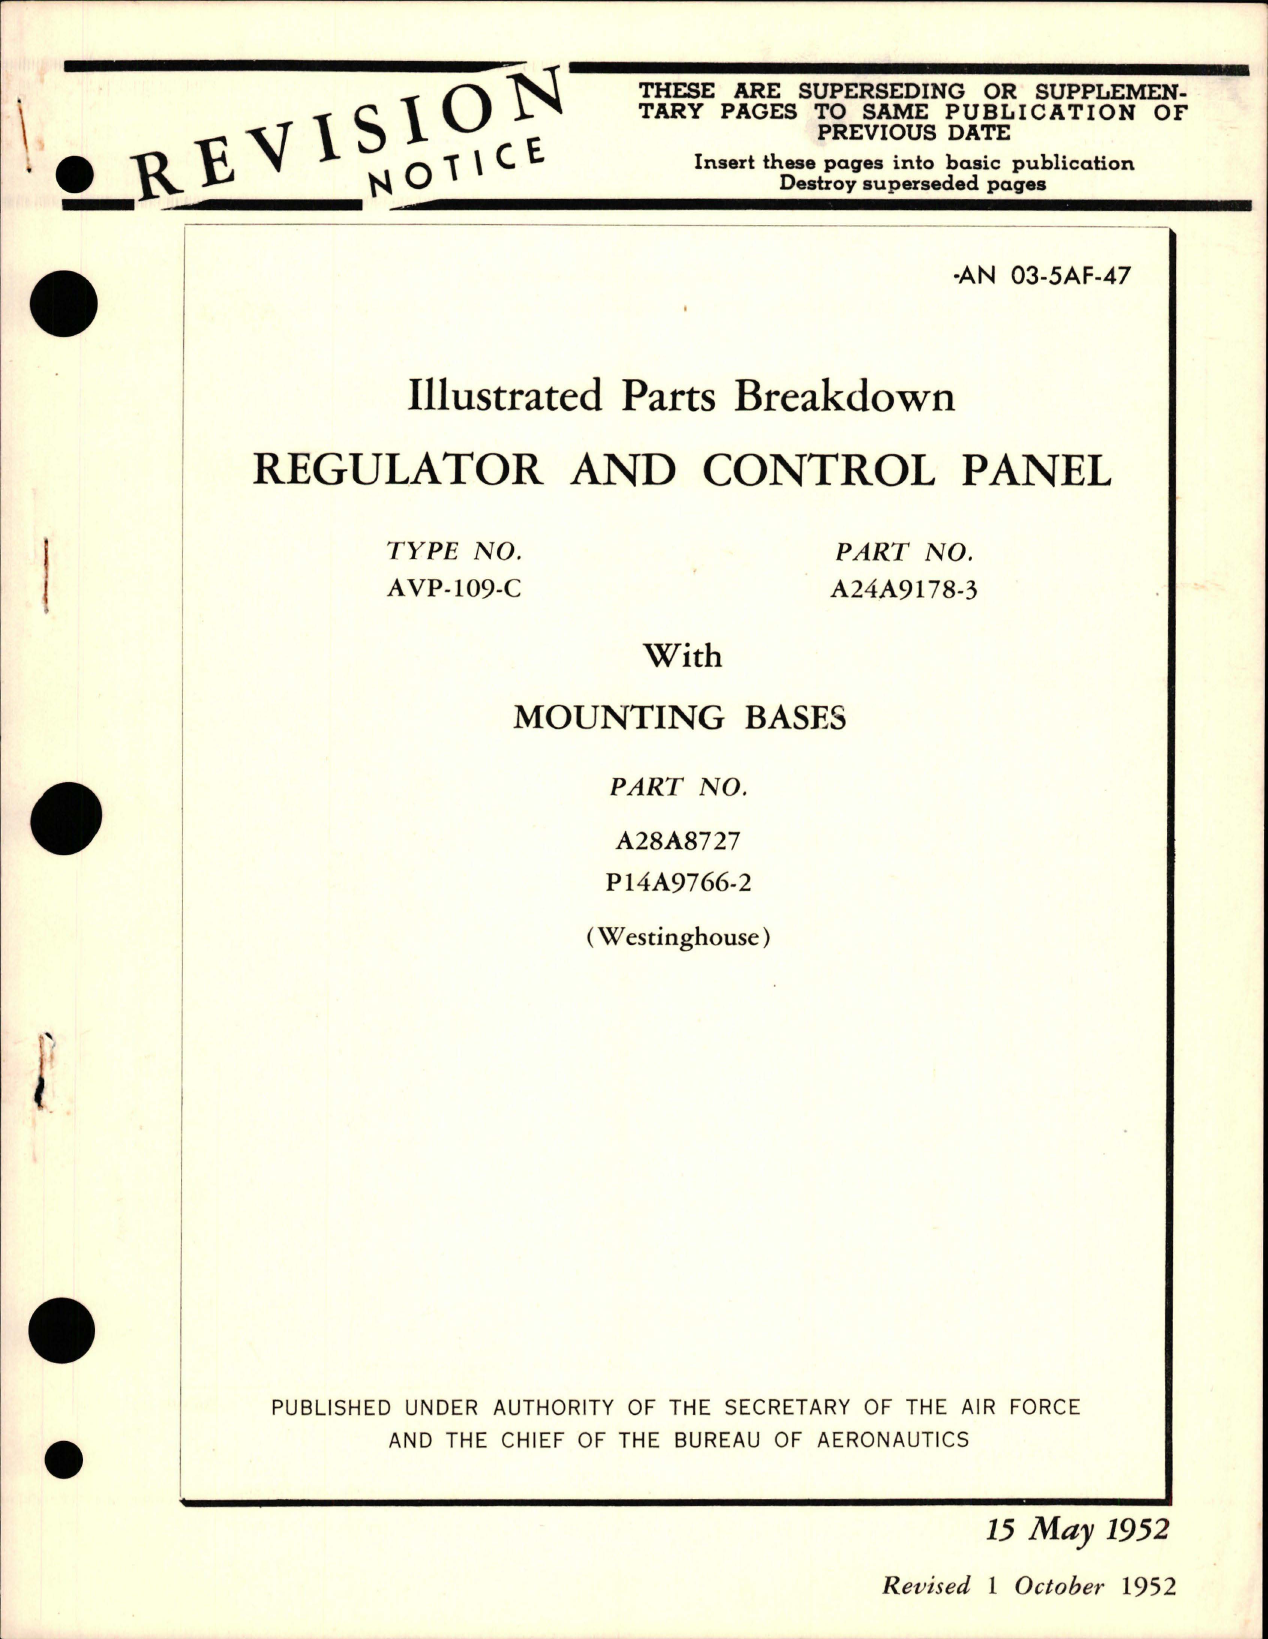 Sample page 1 from AirCorps Library document: Illustrated Parts Breakdown for Regulator & Control Panel - Type AVP-109-C - Part A24A9178-3, Mounting Bases - Parts A28A8727 - P14A9766-2 